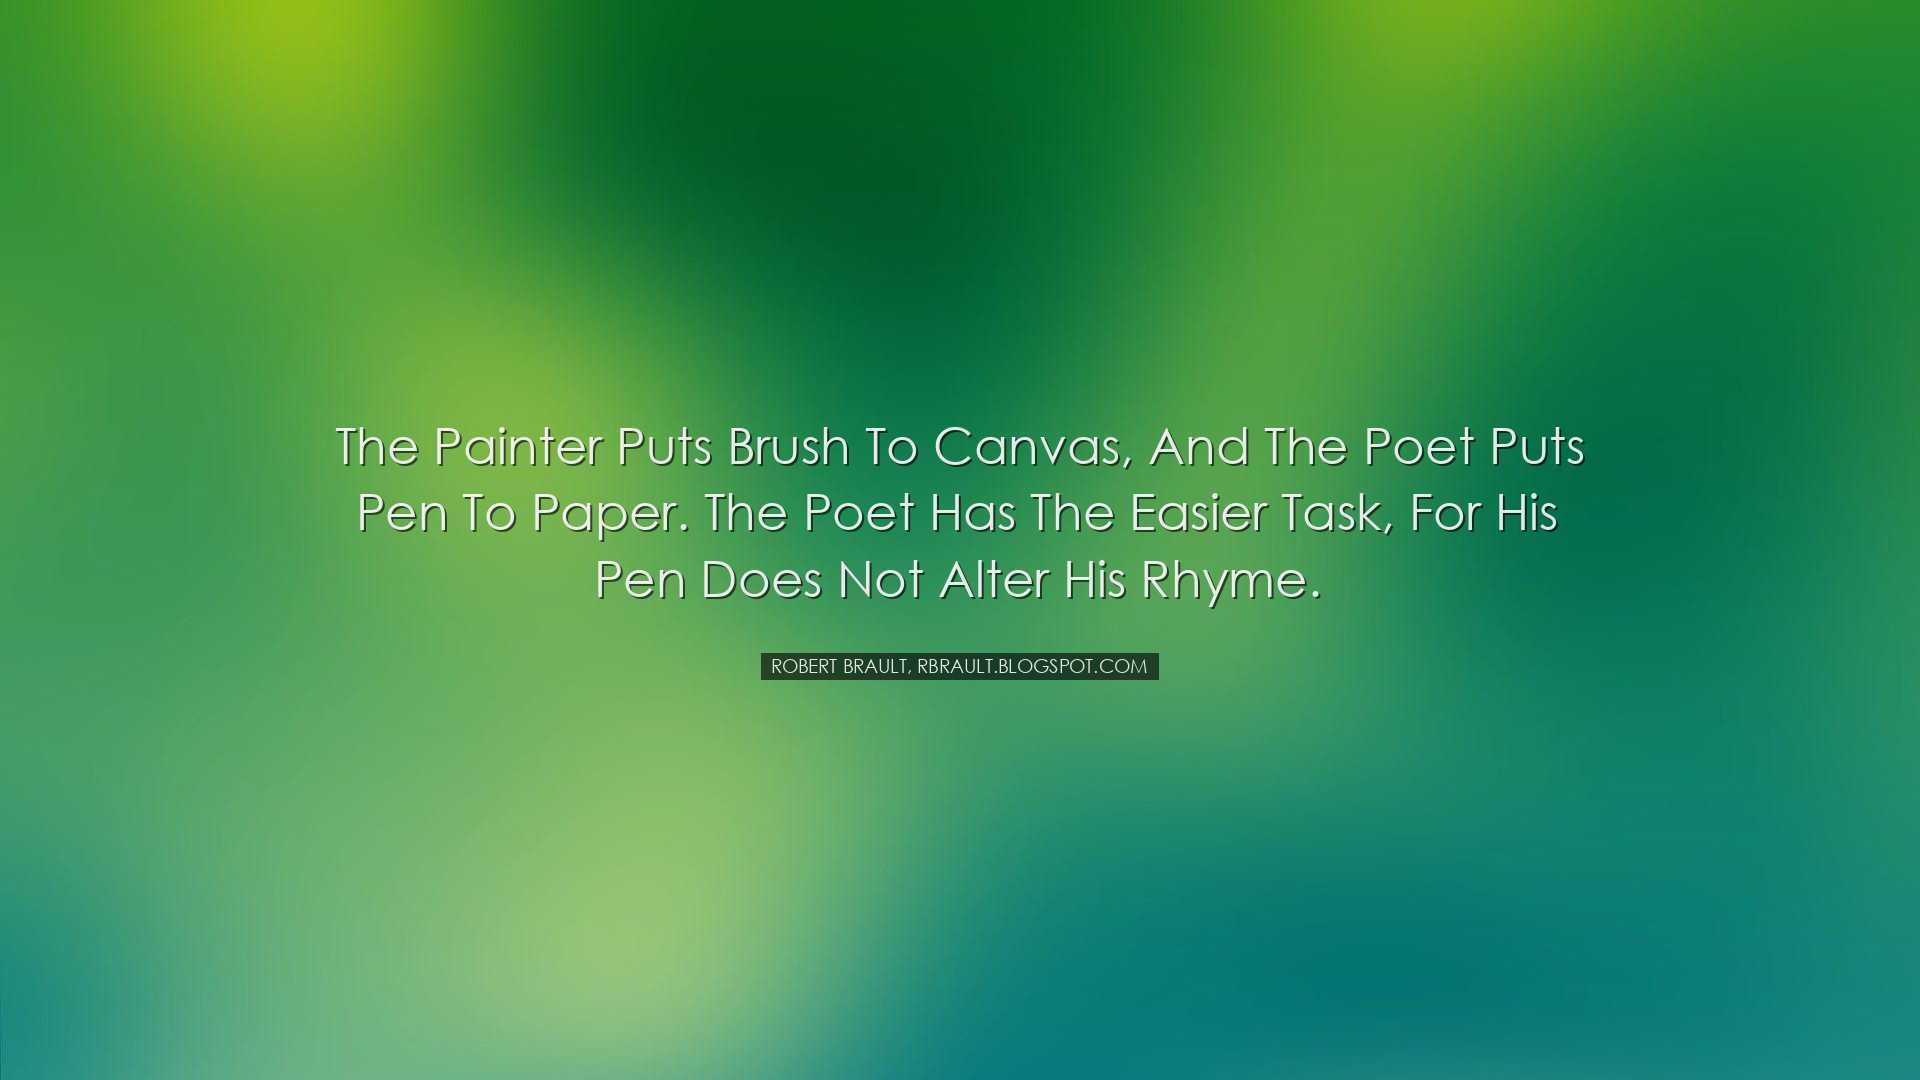 The painter puts brush to canvas, and the poet puts pen to paper.